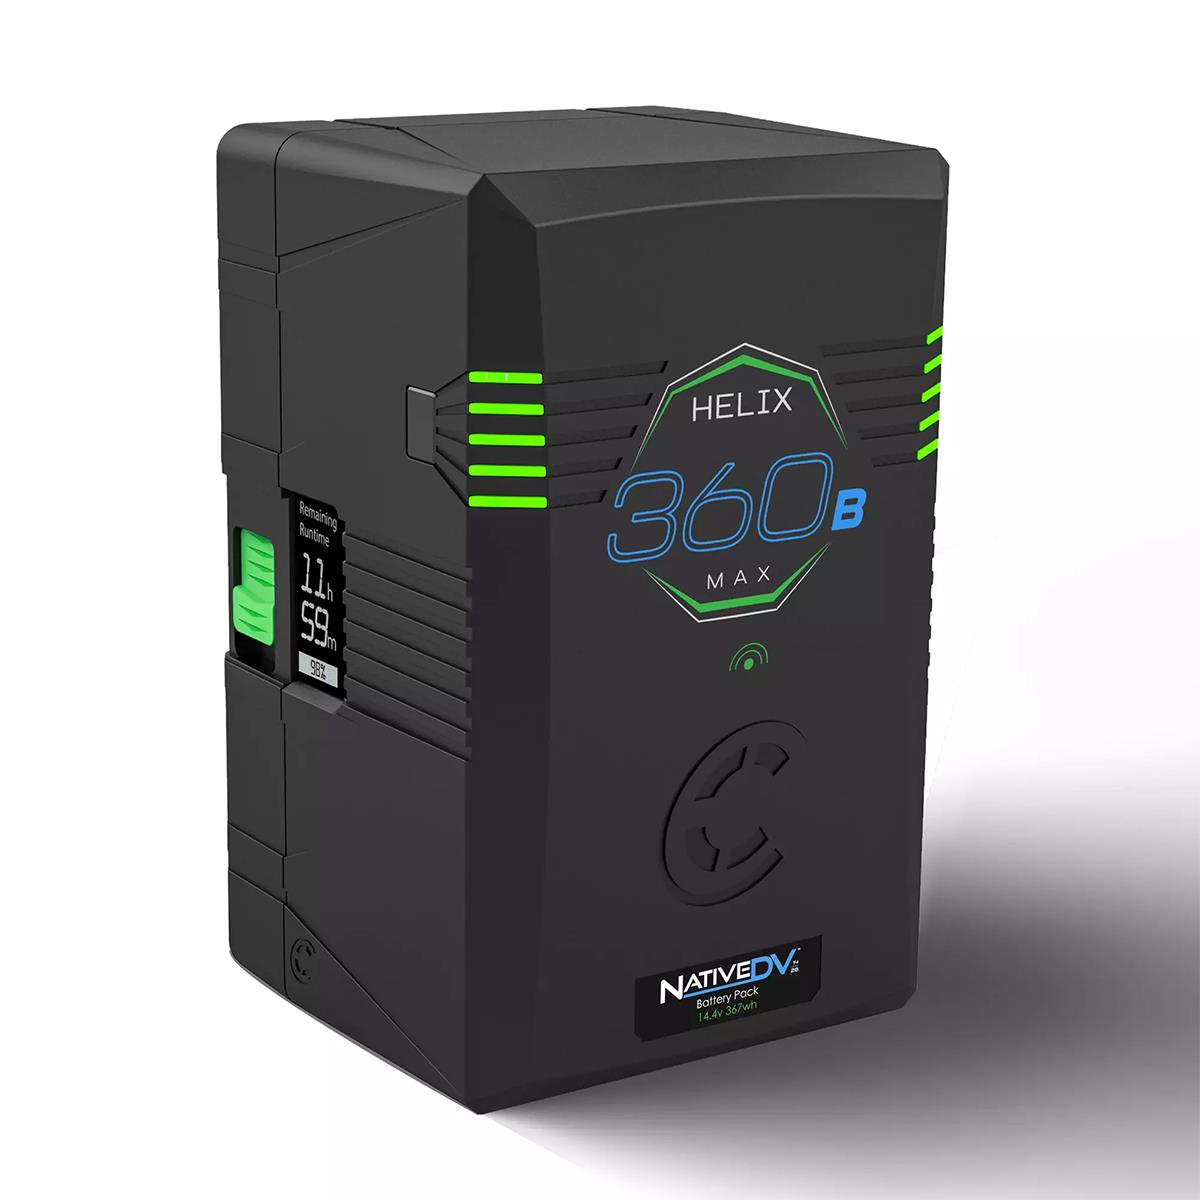 Image of Core SWX Helix Max 360 367Wh Native Dual Voltage Lithium-Ion Battery